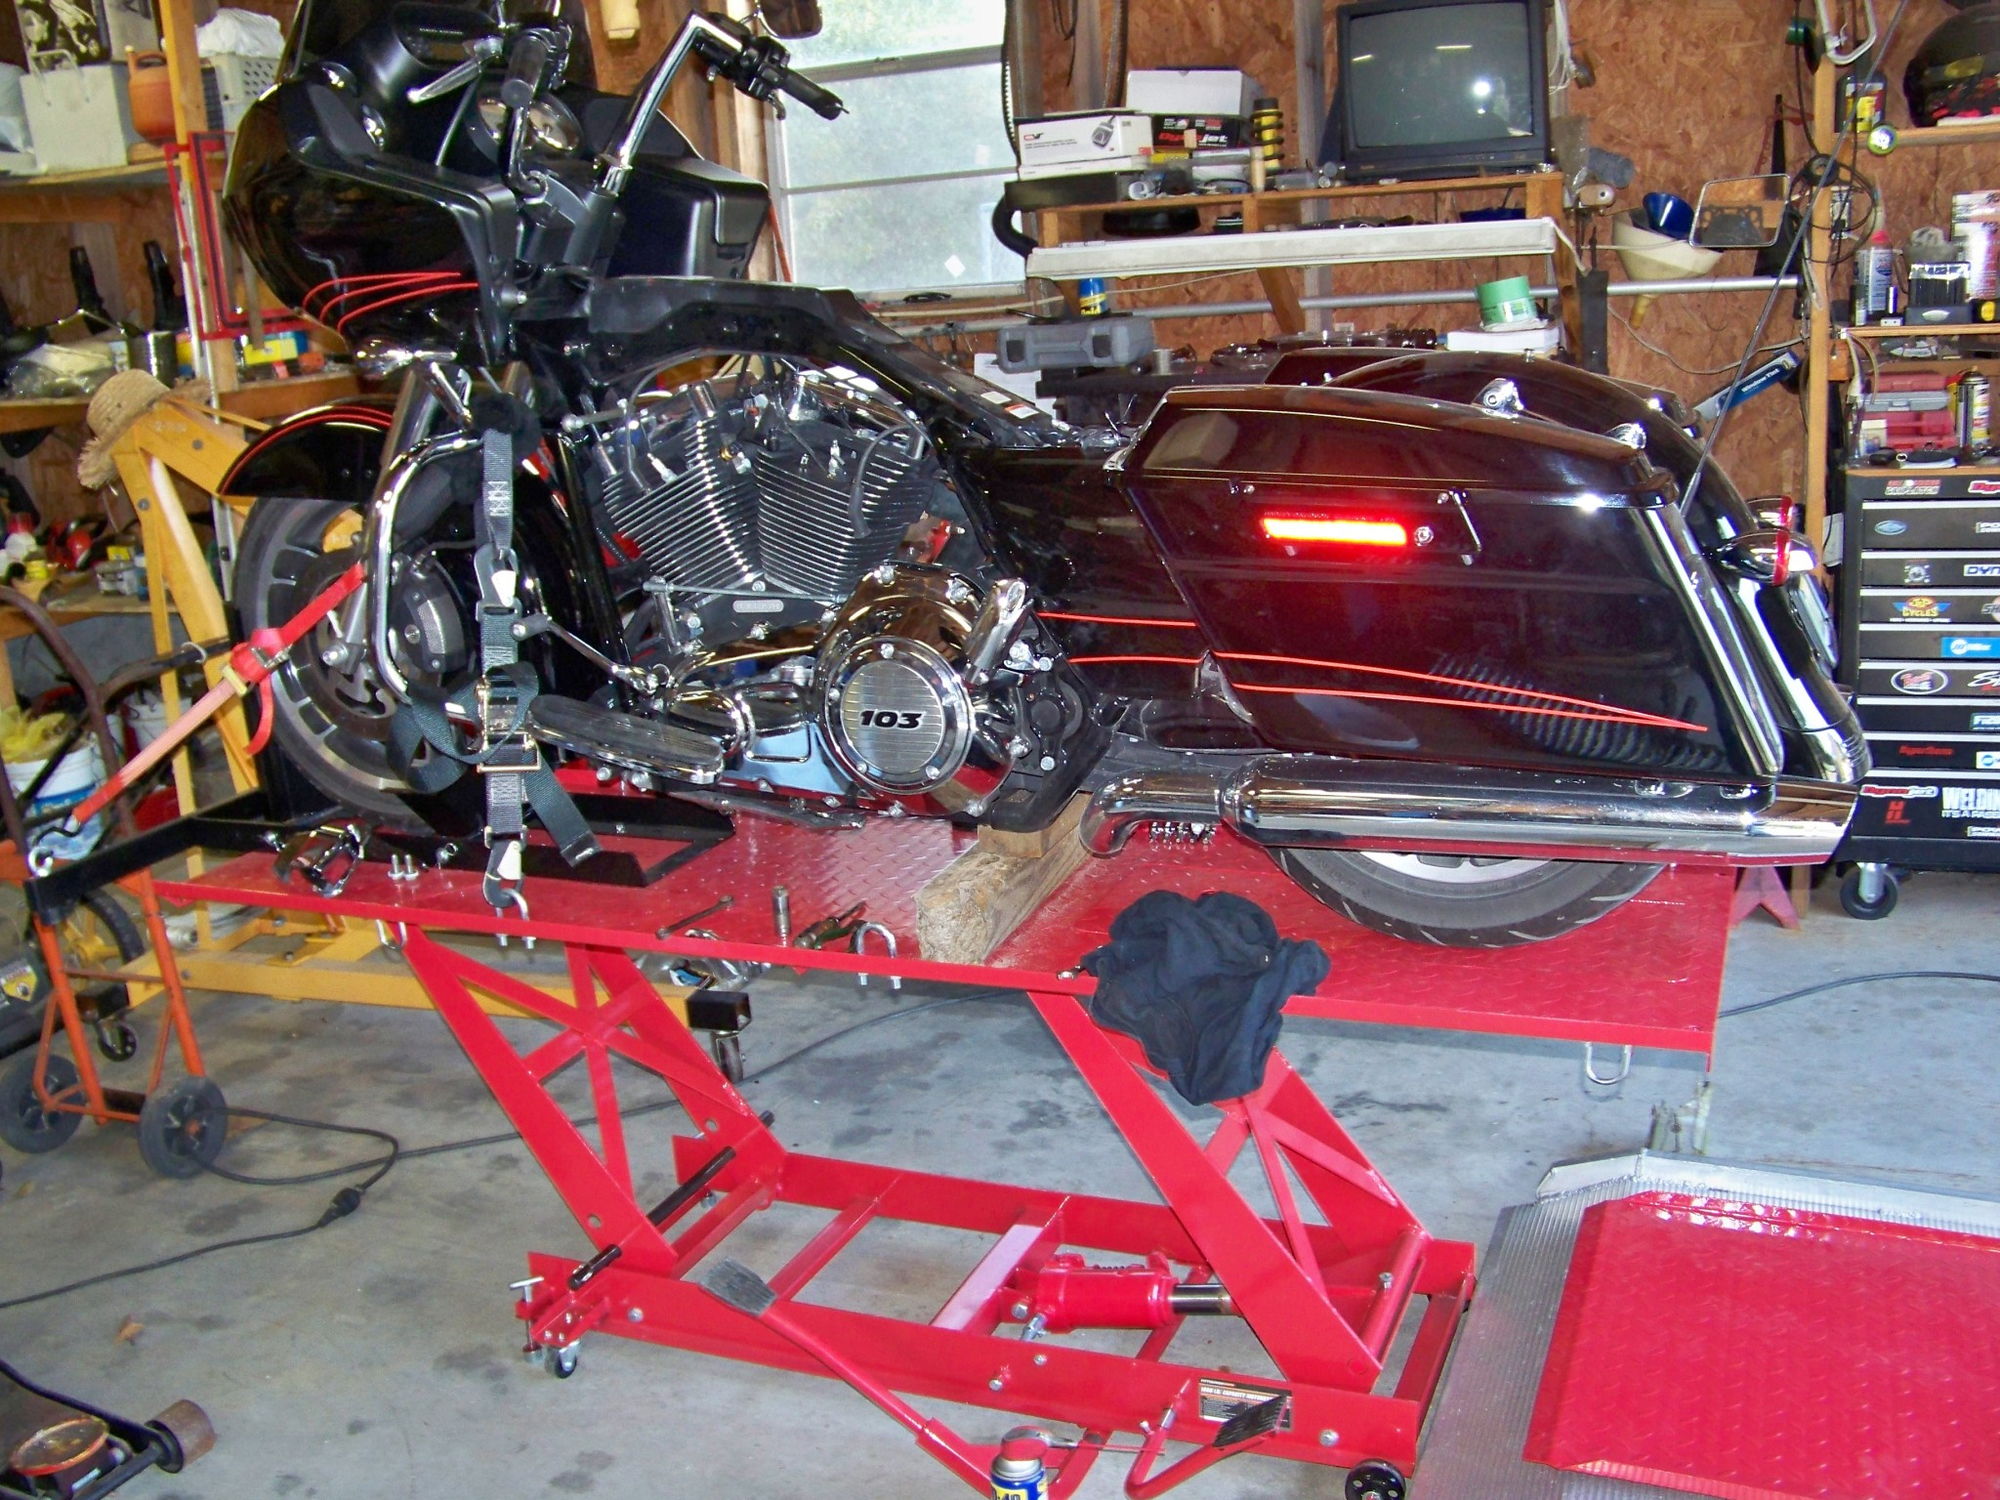 Harbor Freight Motorcycle Lift - Harley Davidson Forums